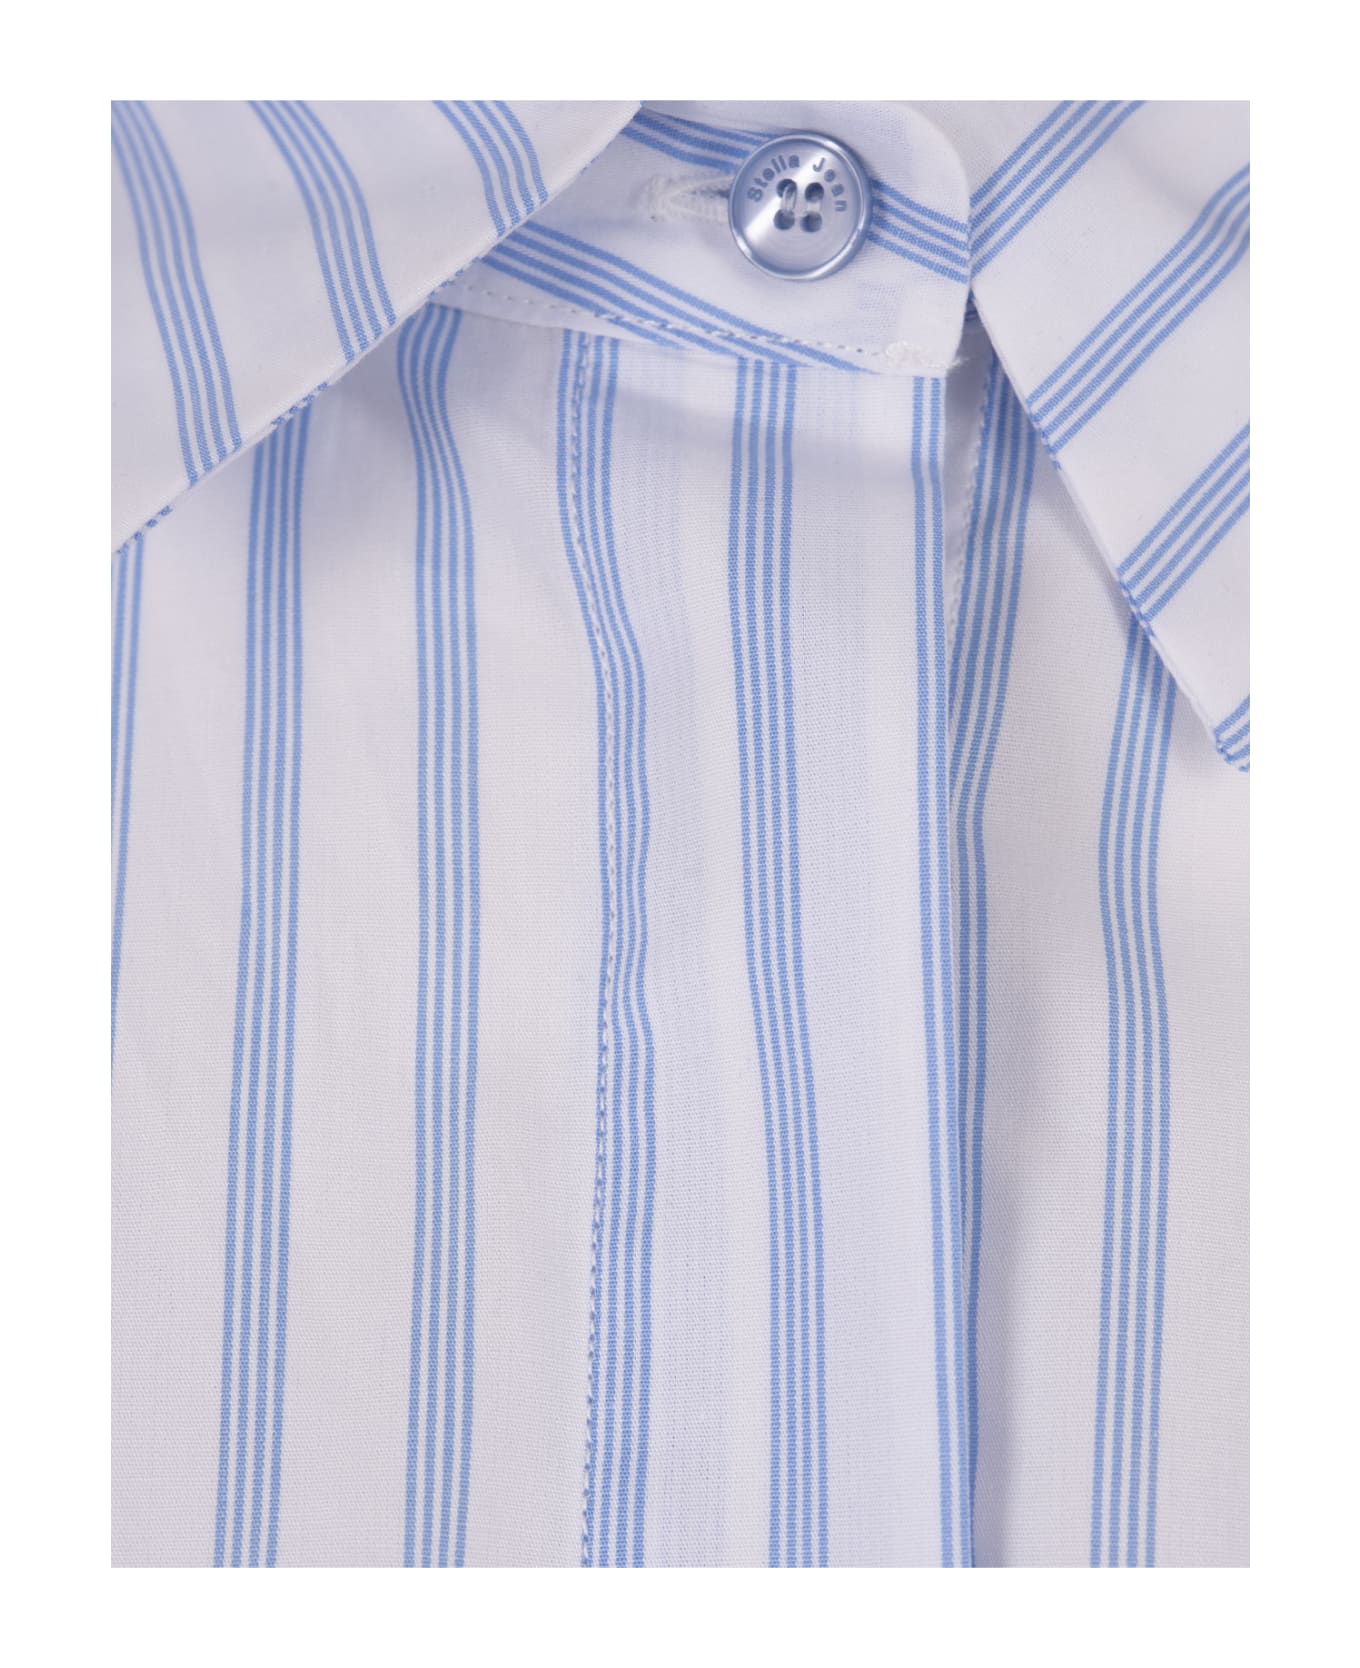 Stella Jean White And Blue Striped Shirt With Short Sleeves - Blue